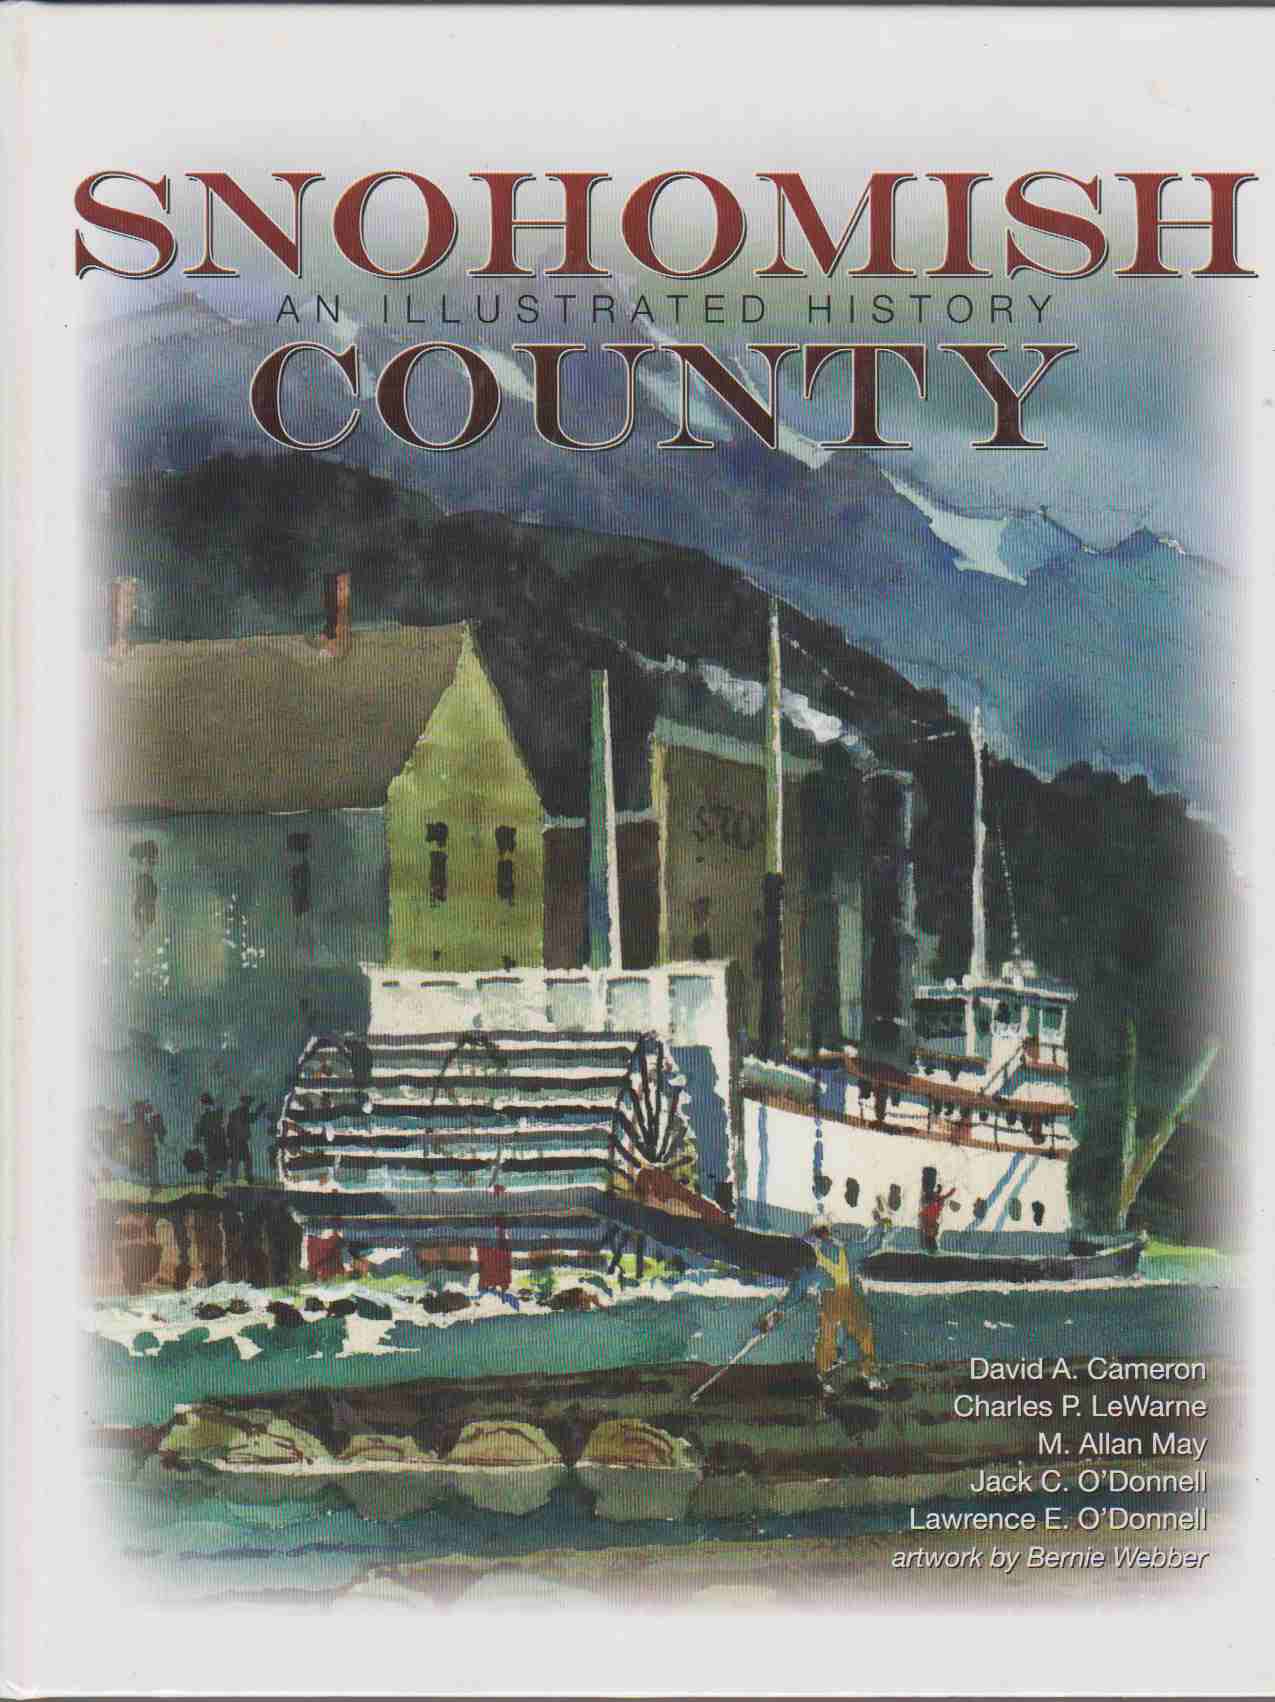 SNOHOMISH COUNTY - AN ILLUSTRATED HISTORY - Cameron, David A. ; Lewarne, Charles P. ; May, M. Allan; O'Donnell, Jack C. ; and Lawrence E. O'Donnell